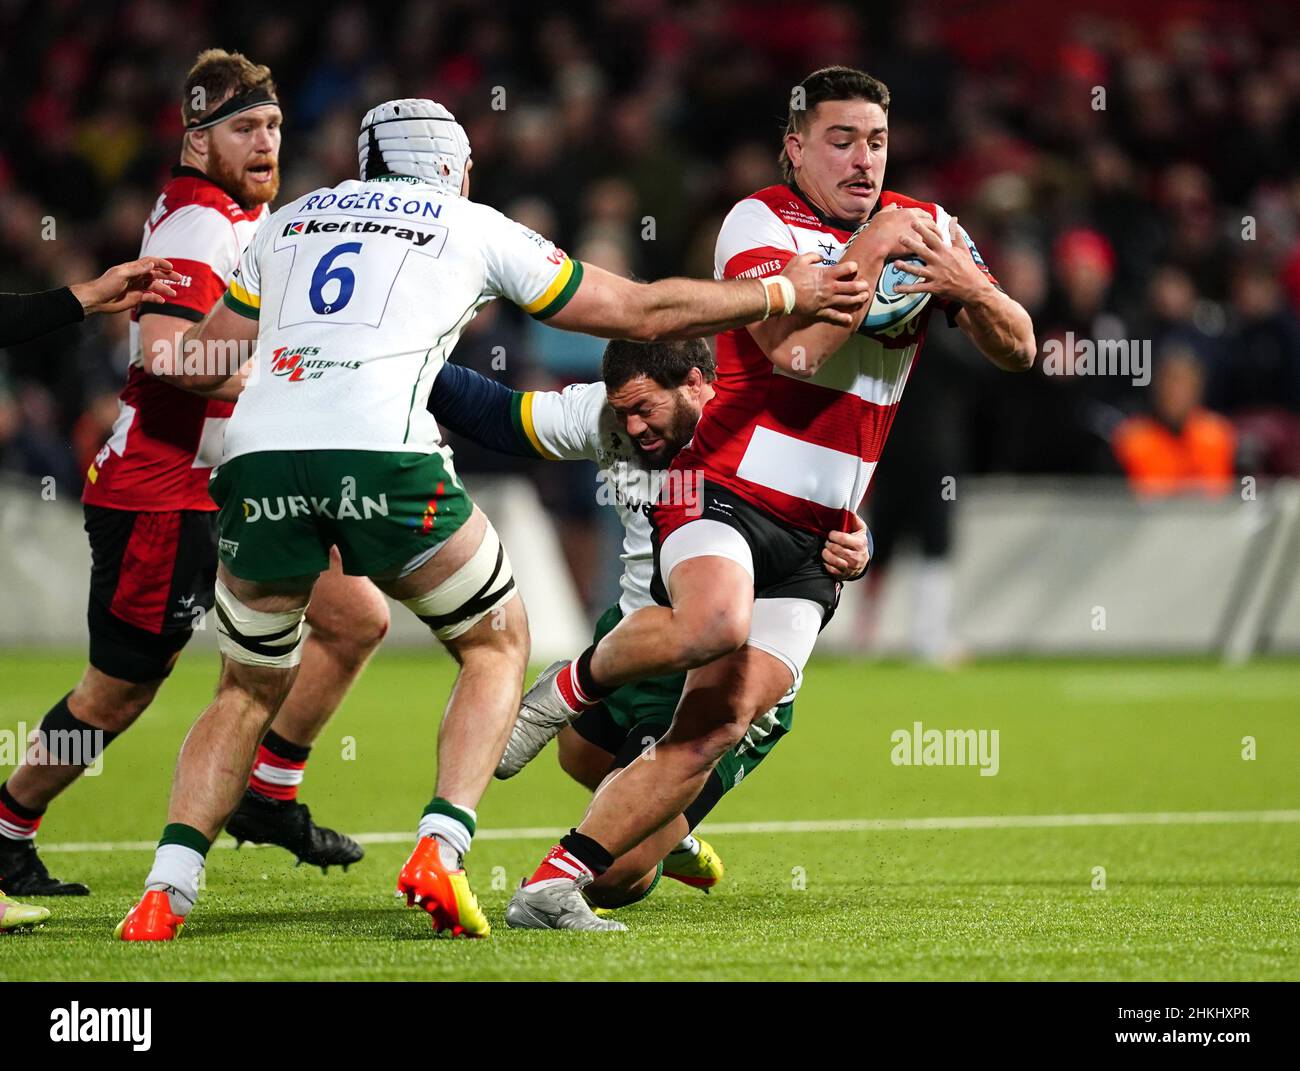 Gloucester Rugby's Harry Elrington breaks through during the Gallagher Premiership match at the Kingsholm Stadium, Gloucester. Picture date: Friday February 4, 2022. Stock Photo